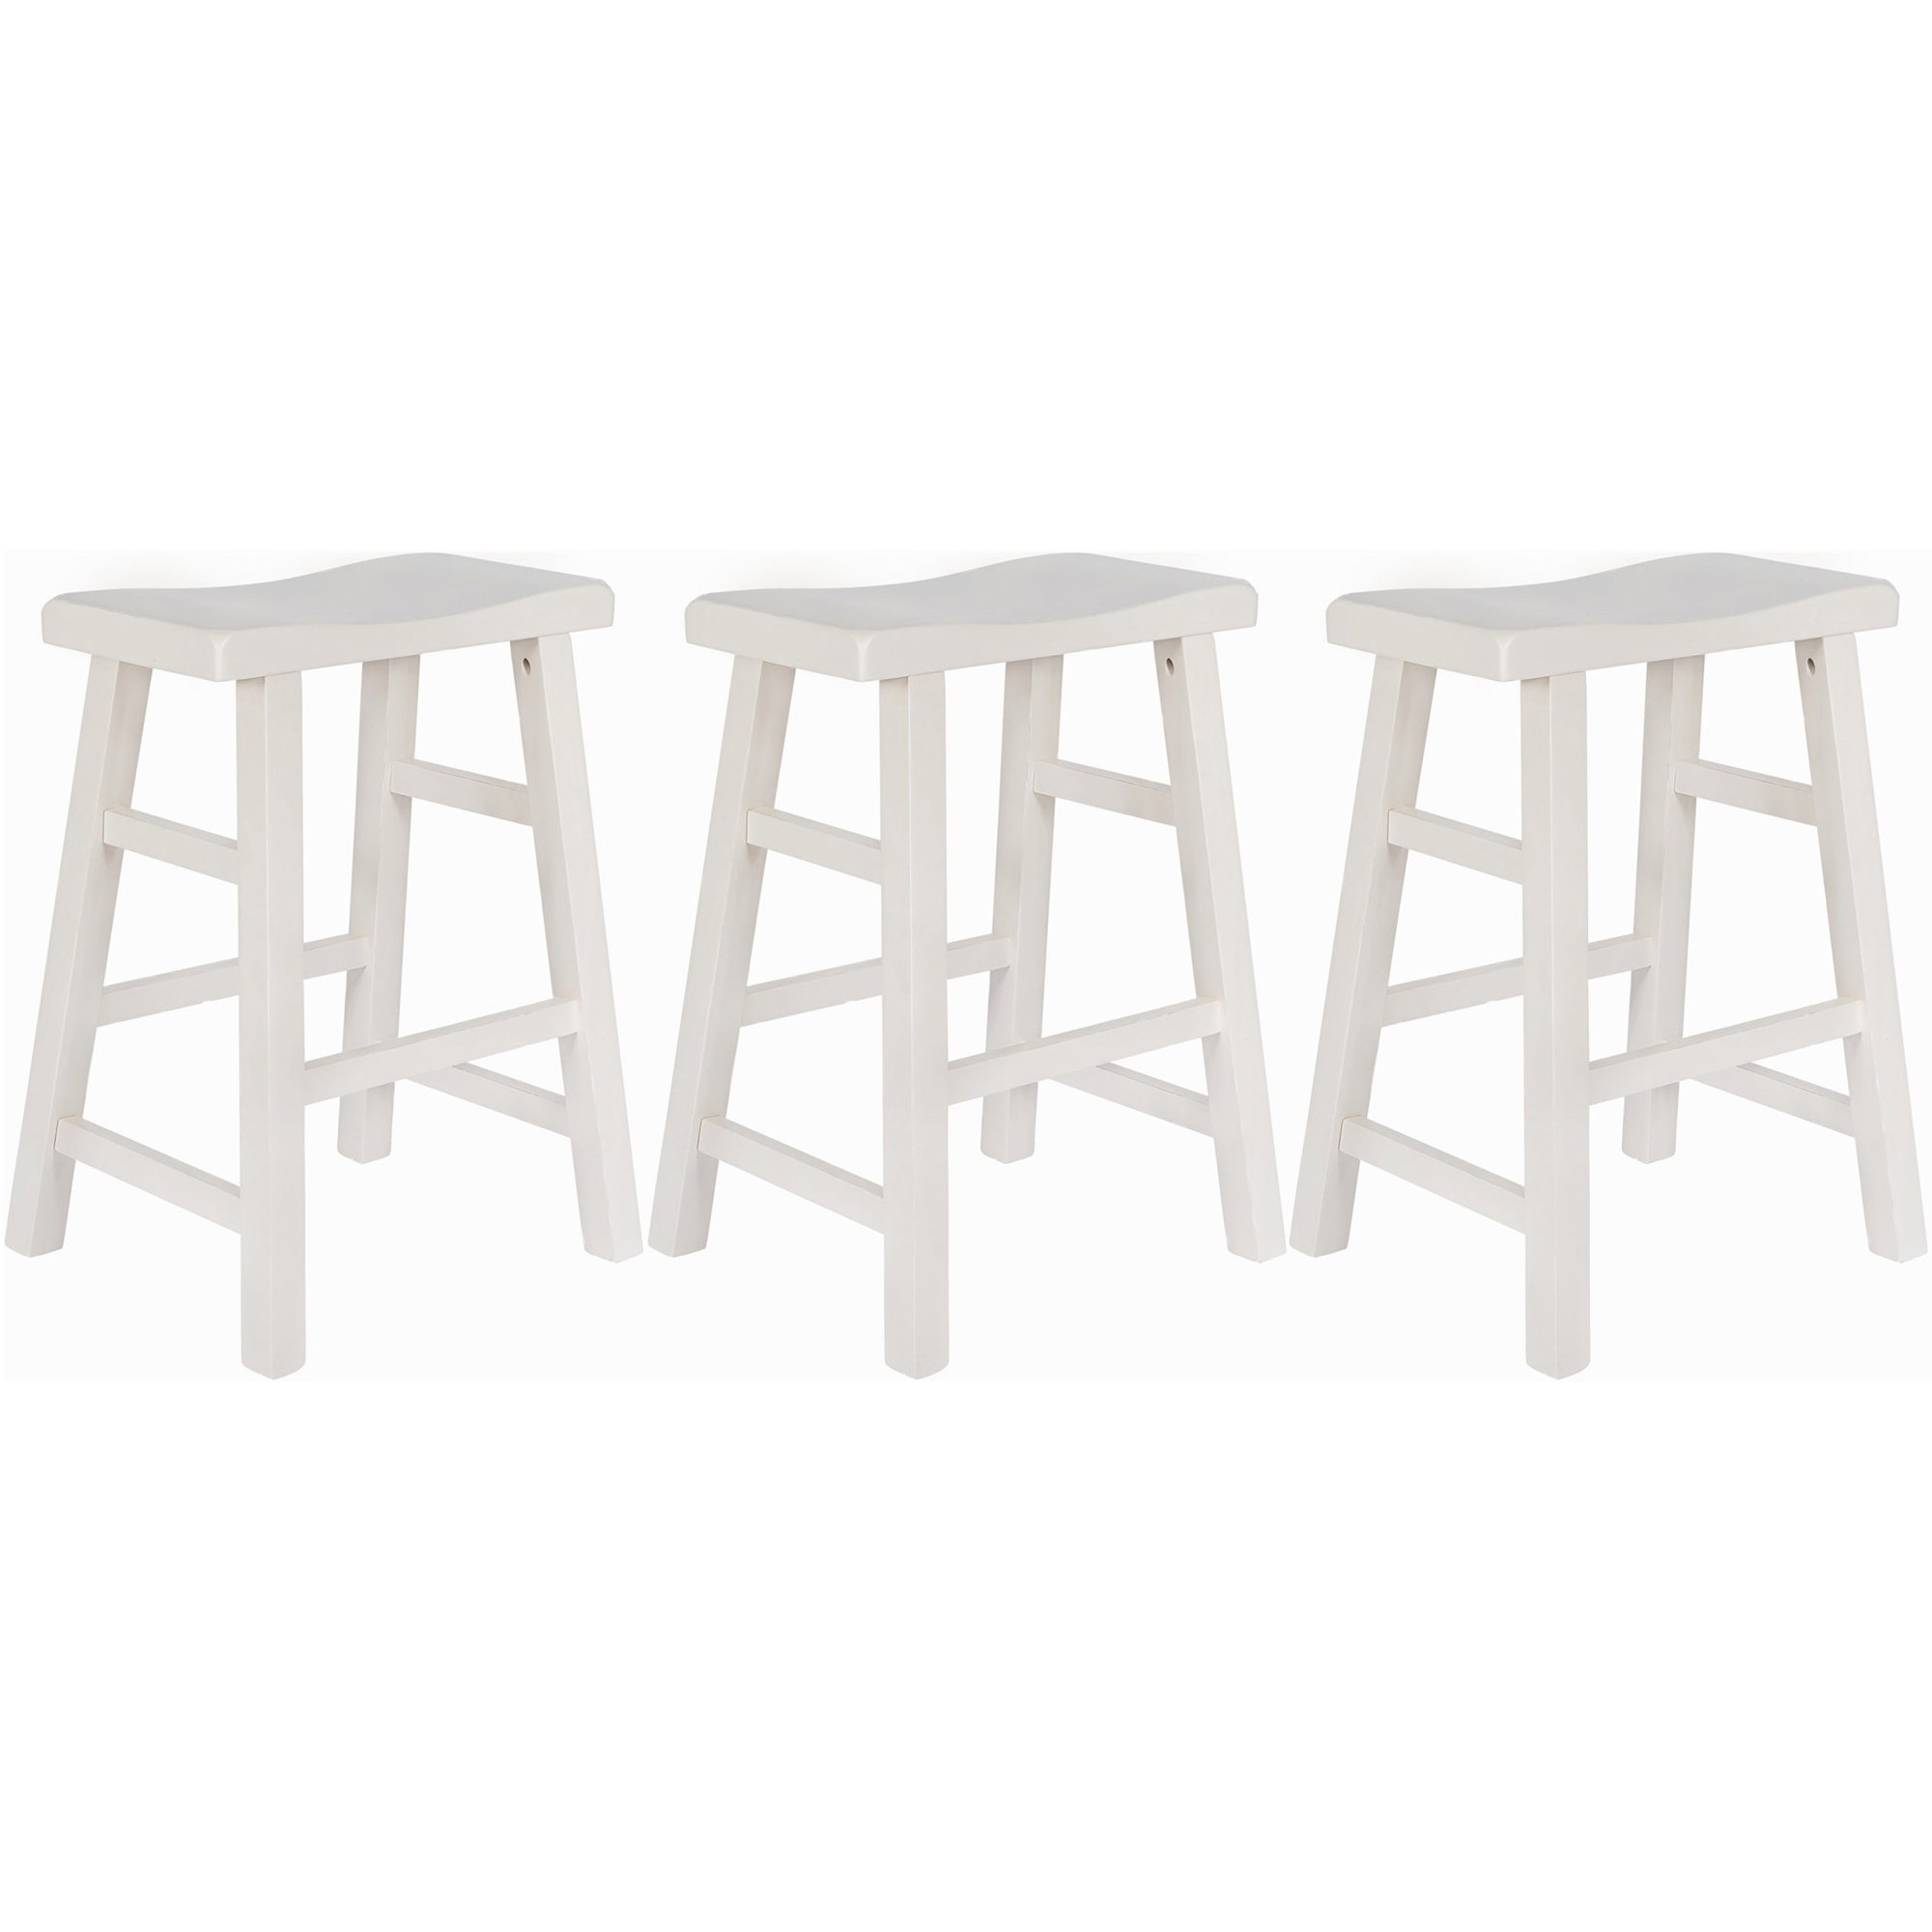 eHemco Heavy-Duty Solid Wood Saddle Seat Kitchen Counter Height Barstools, 24 Inches, White, Set of 3 - image 1 of 6